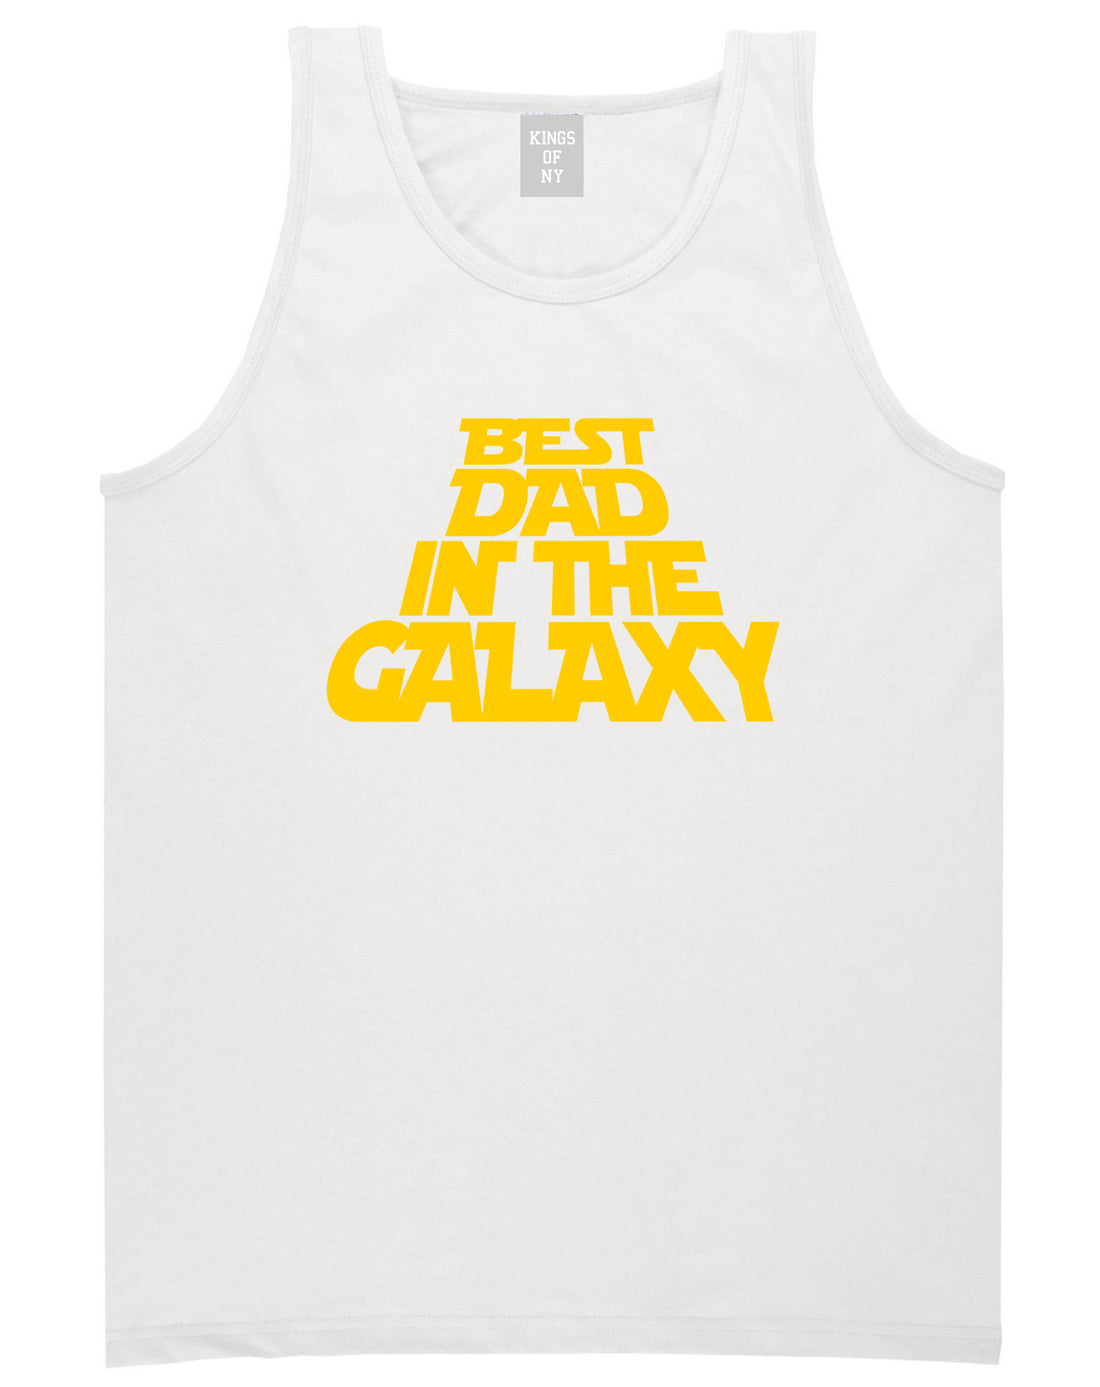 Best Dad In The Galaxy Mens Tank Top T-Shirt White